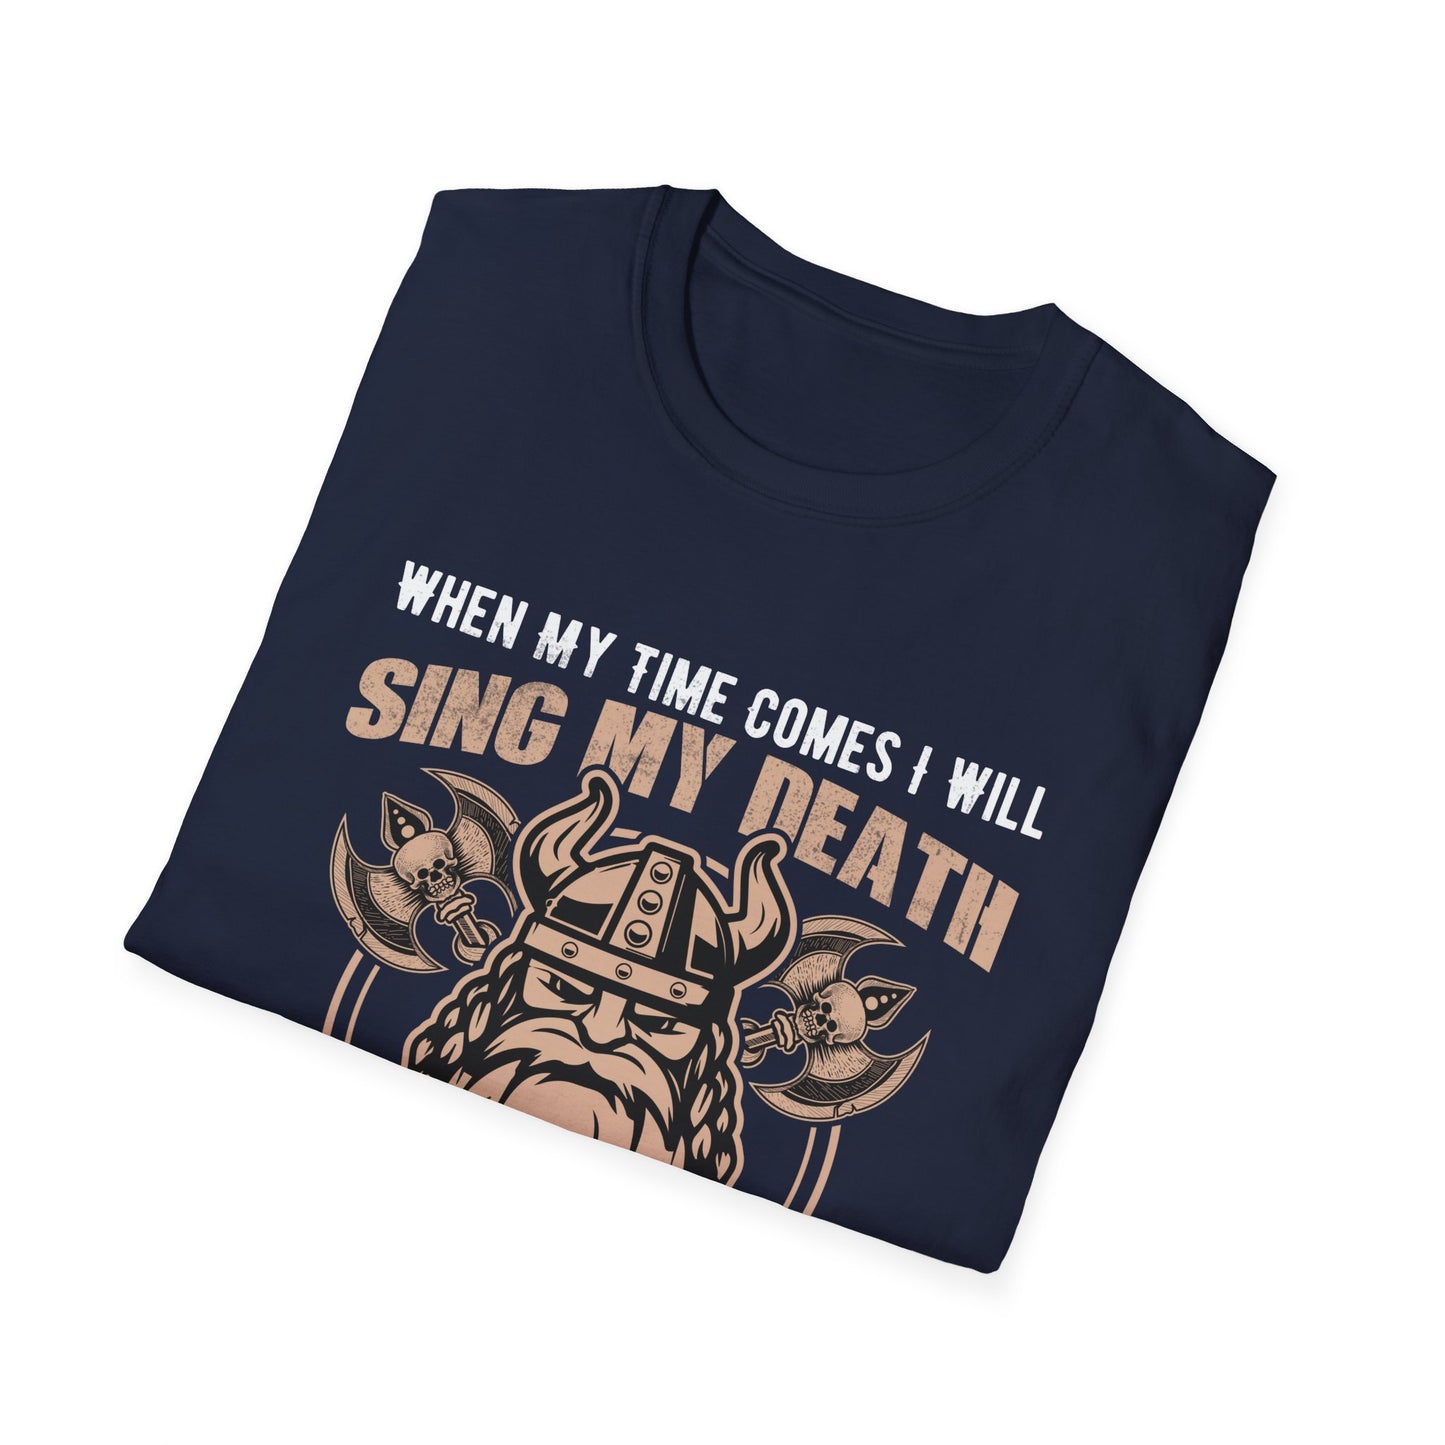 When My Time Comes I Will Sing My Death Song And Die Like A Warrior Going Home T-Shirt